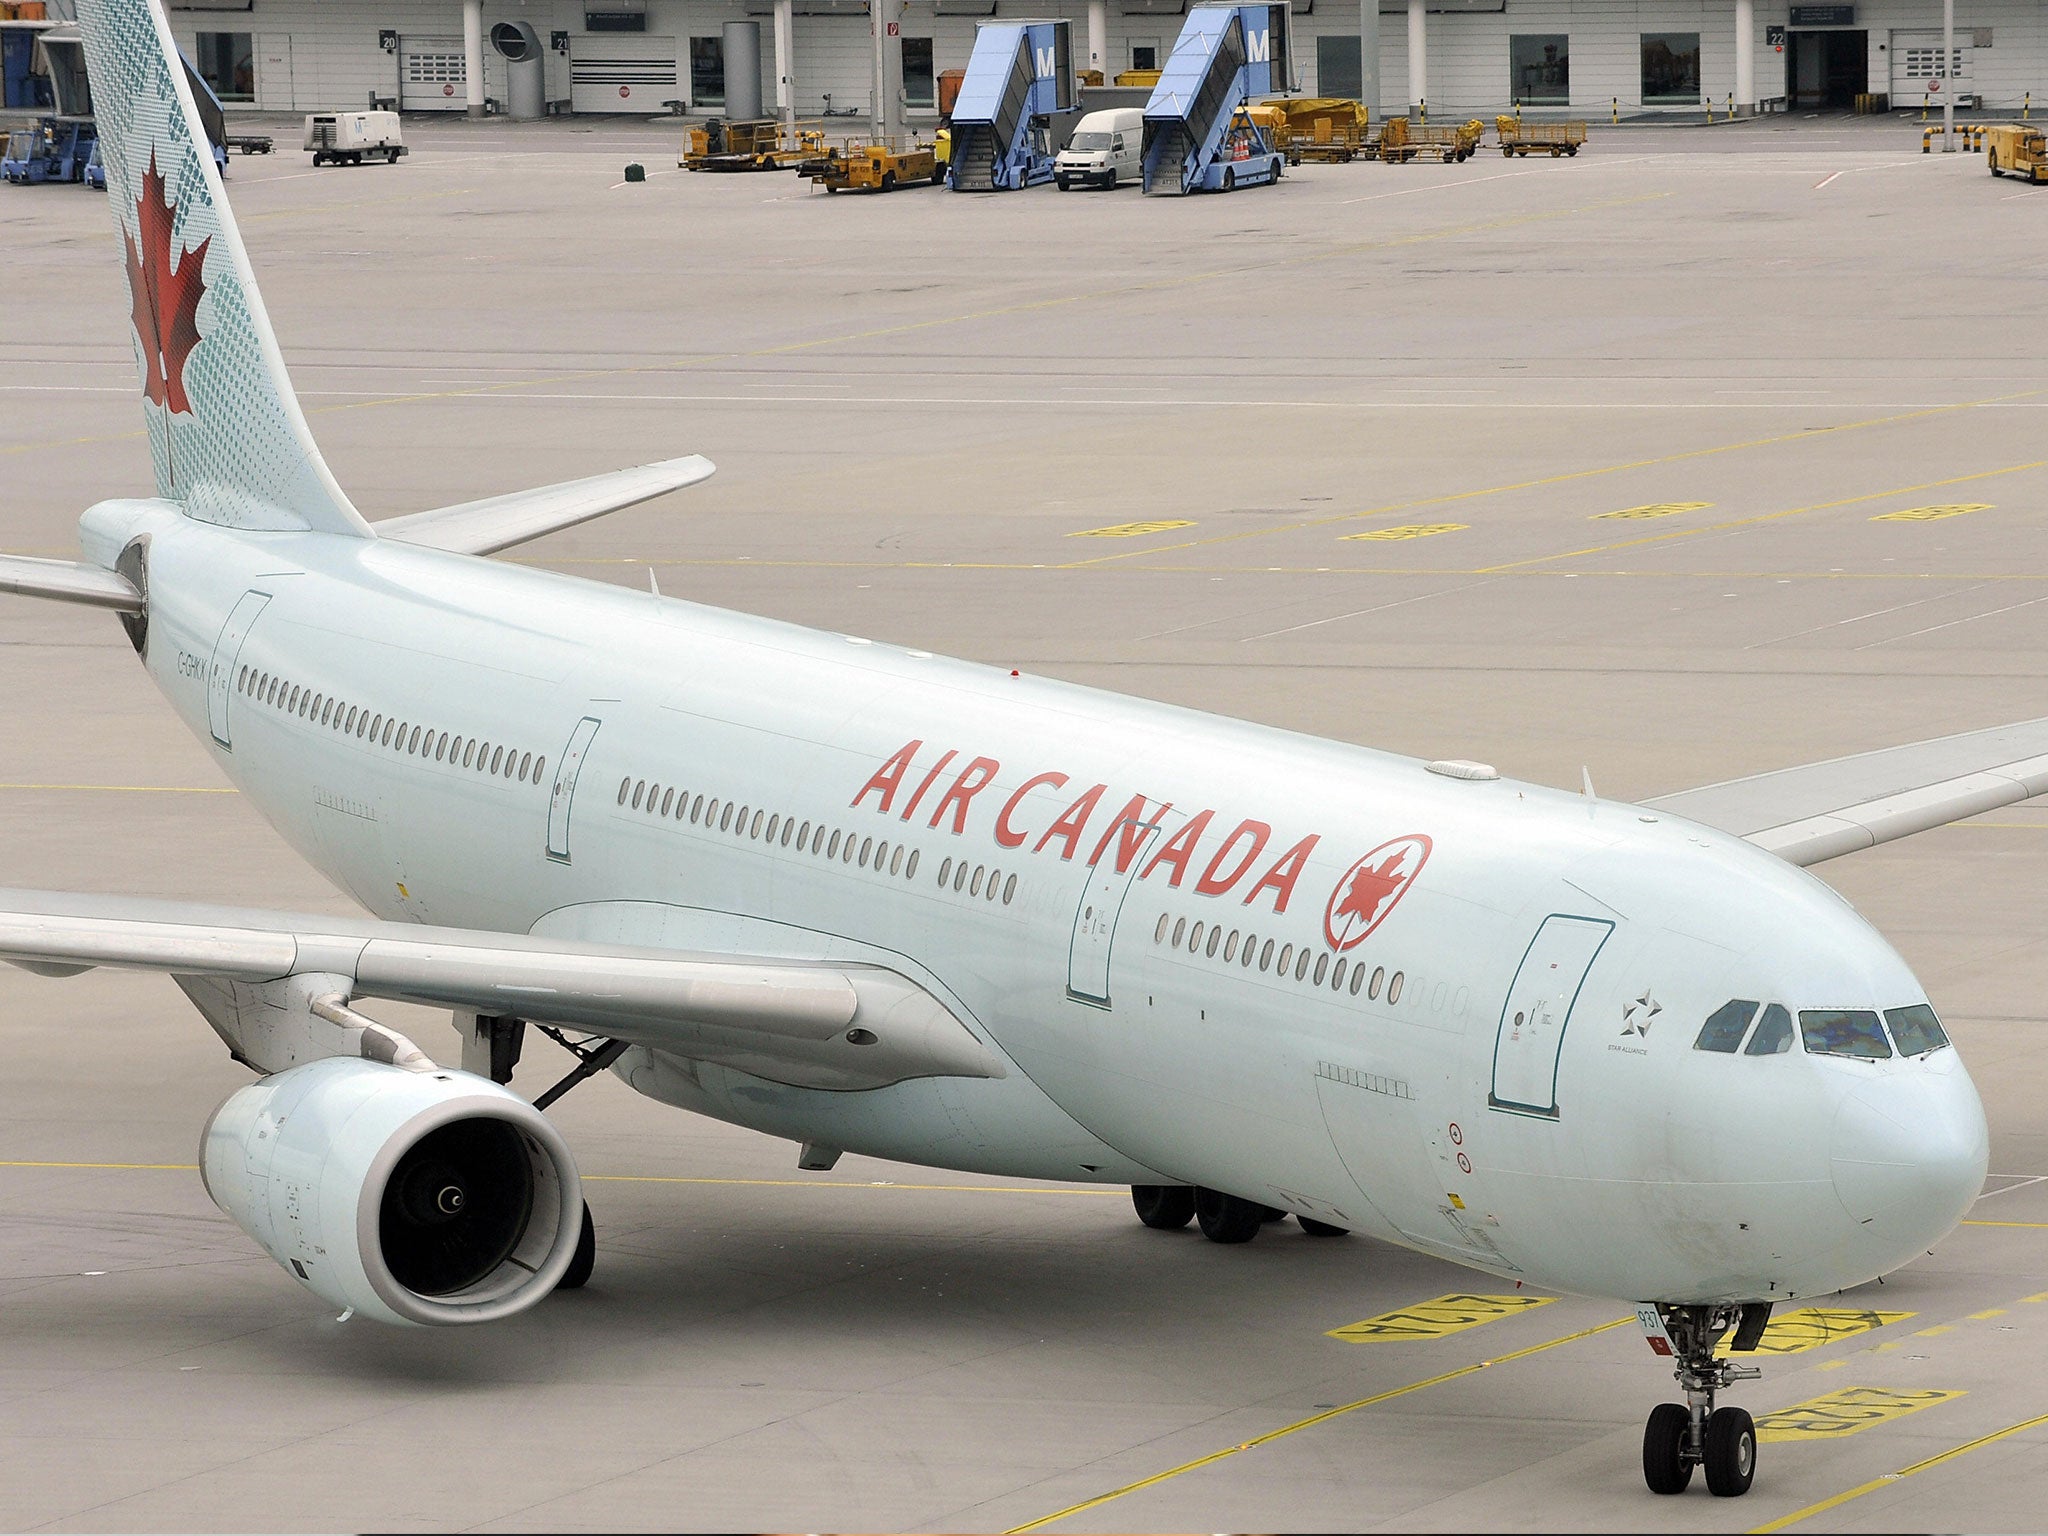 Air Canada has launched its own investigation into Flight 759 from Toronto